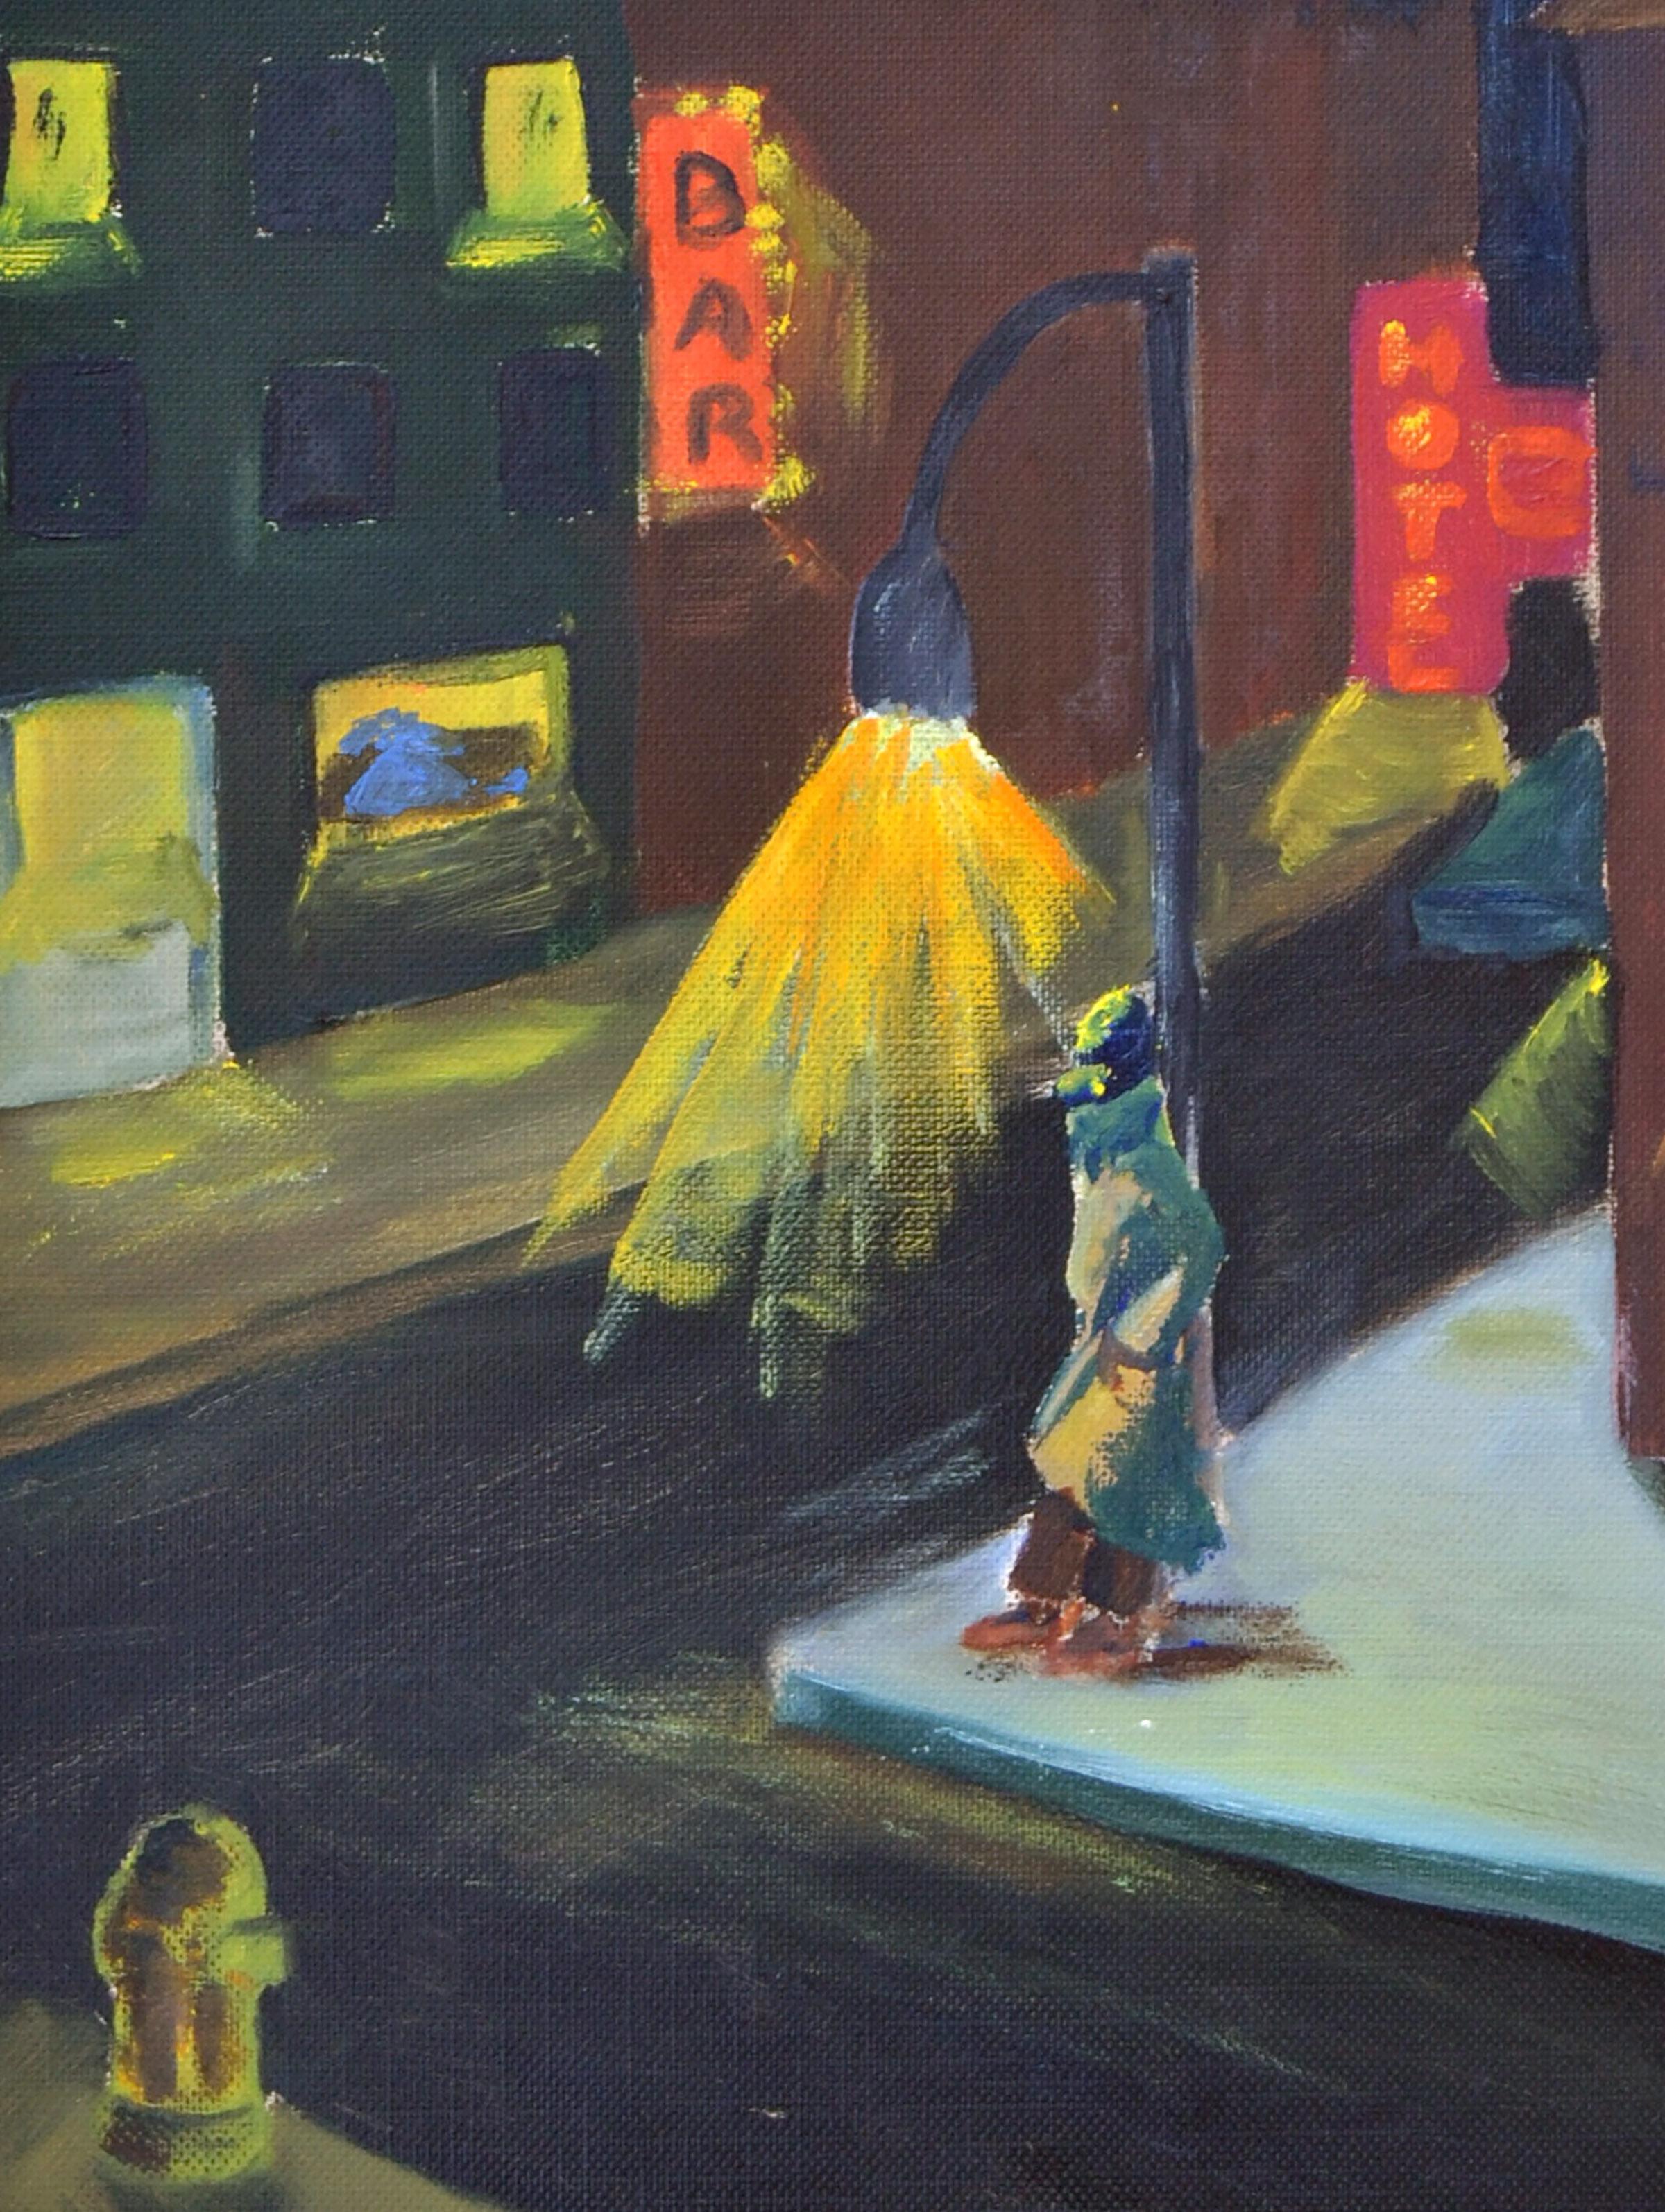 Bay Area Nocturnal Urban Landscape with Figure  - Painting by Tari Sigman Bowman